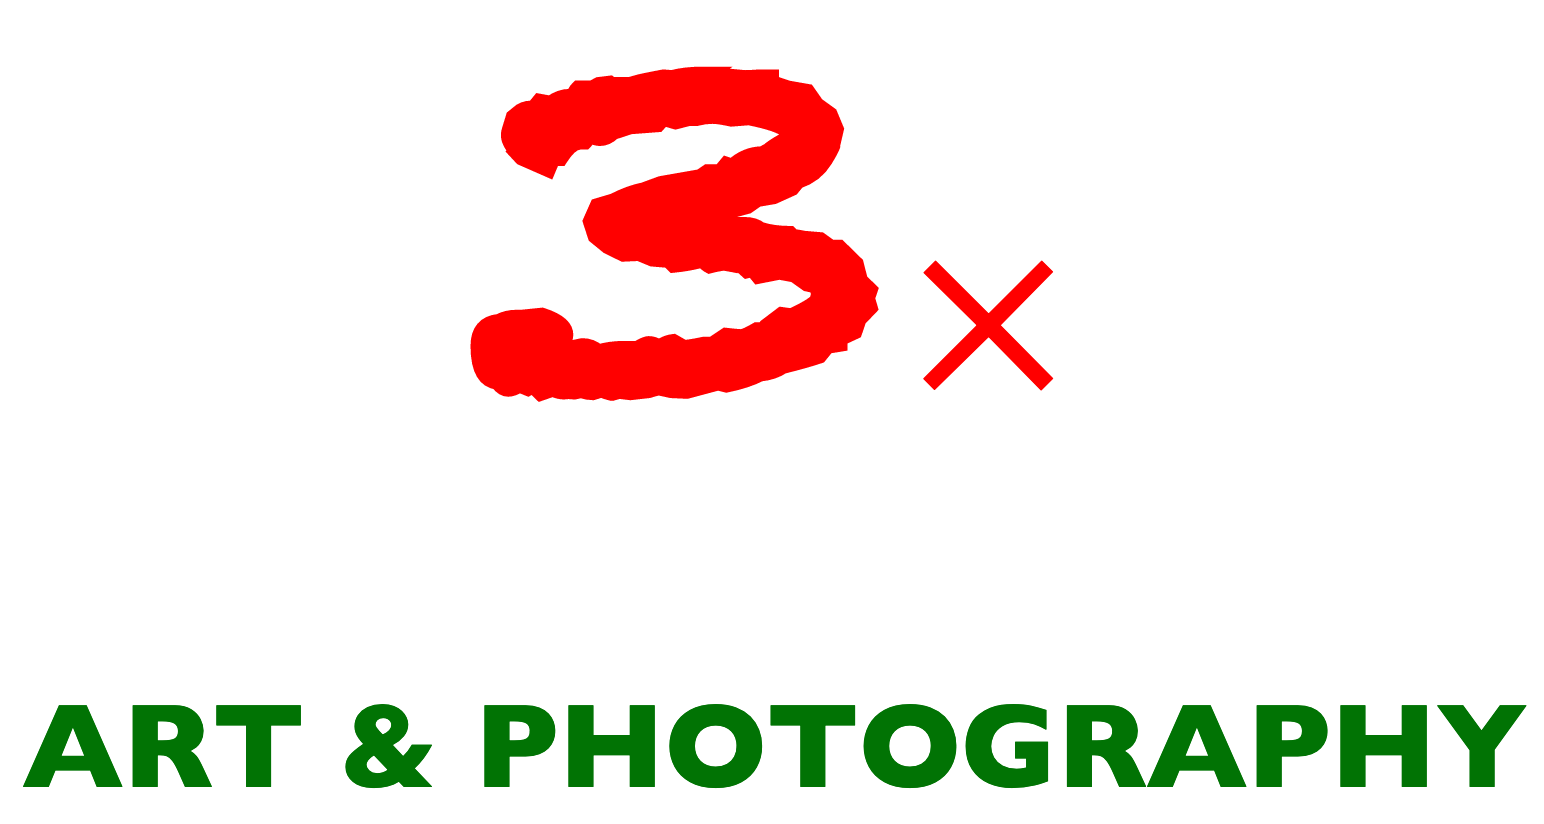 3 x art and photography